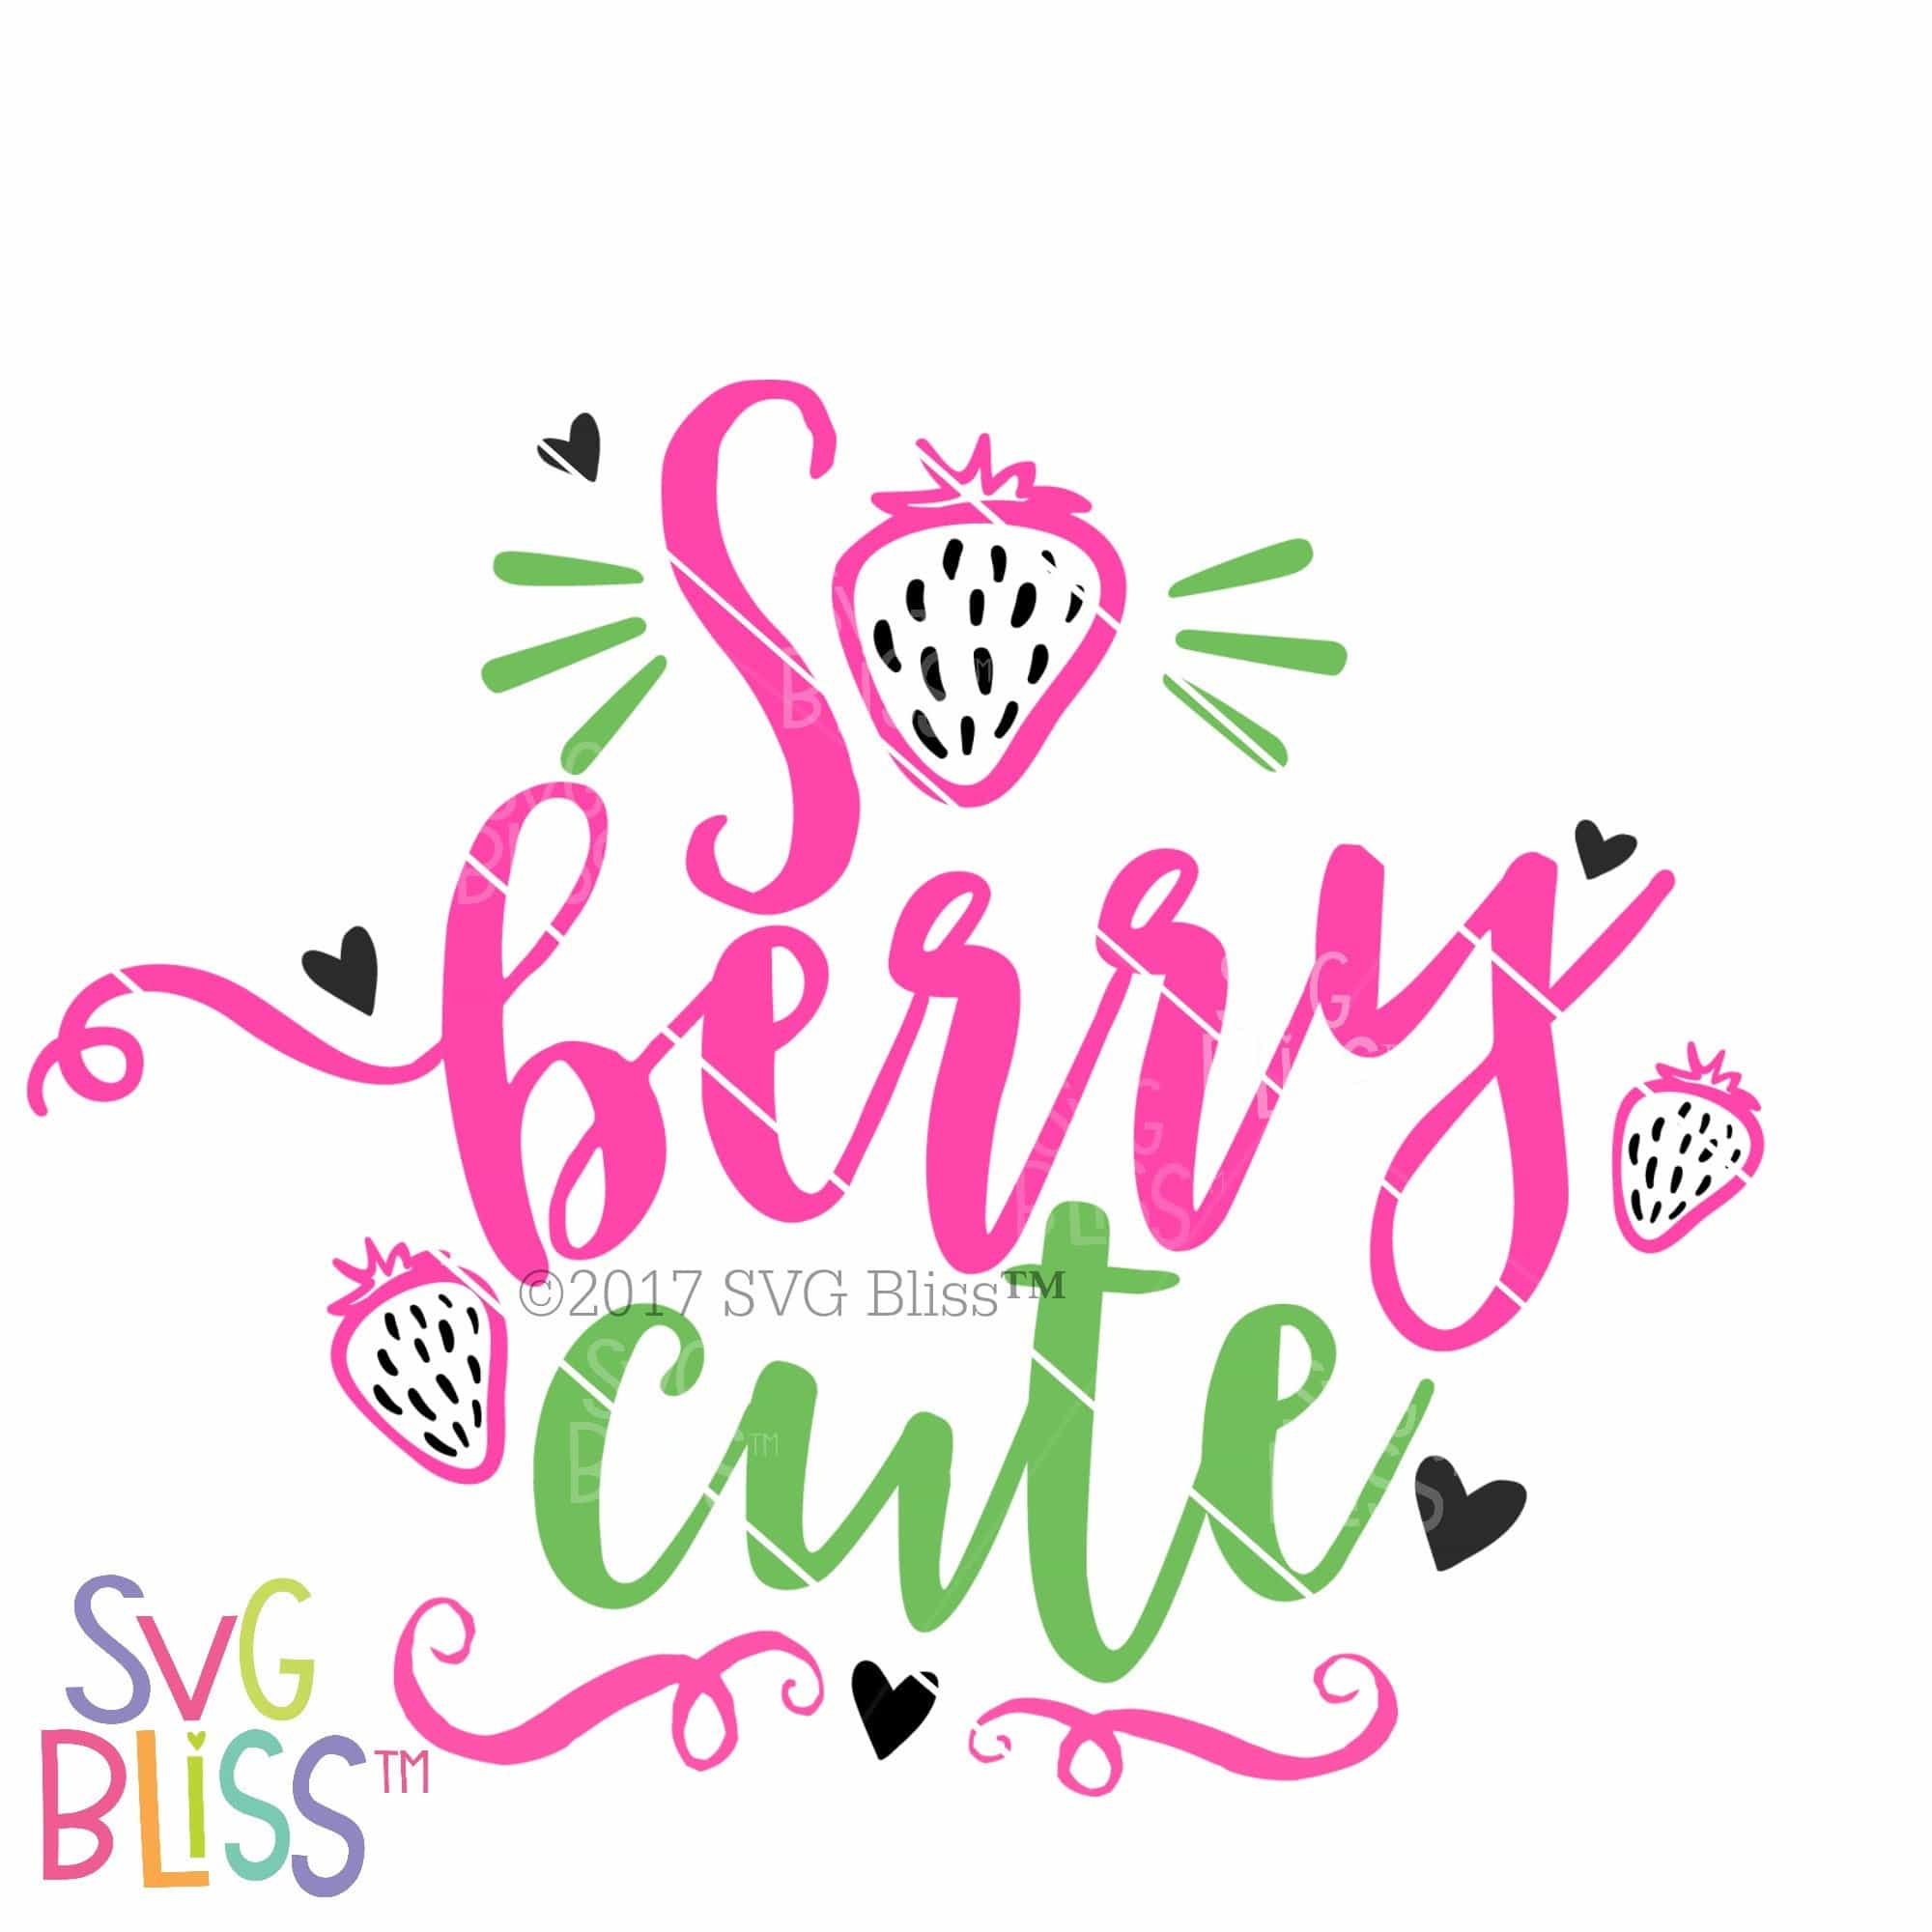 Download So Berry Cute | SVG EPS DXF PNG - SVG Bliss